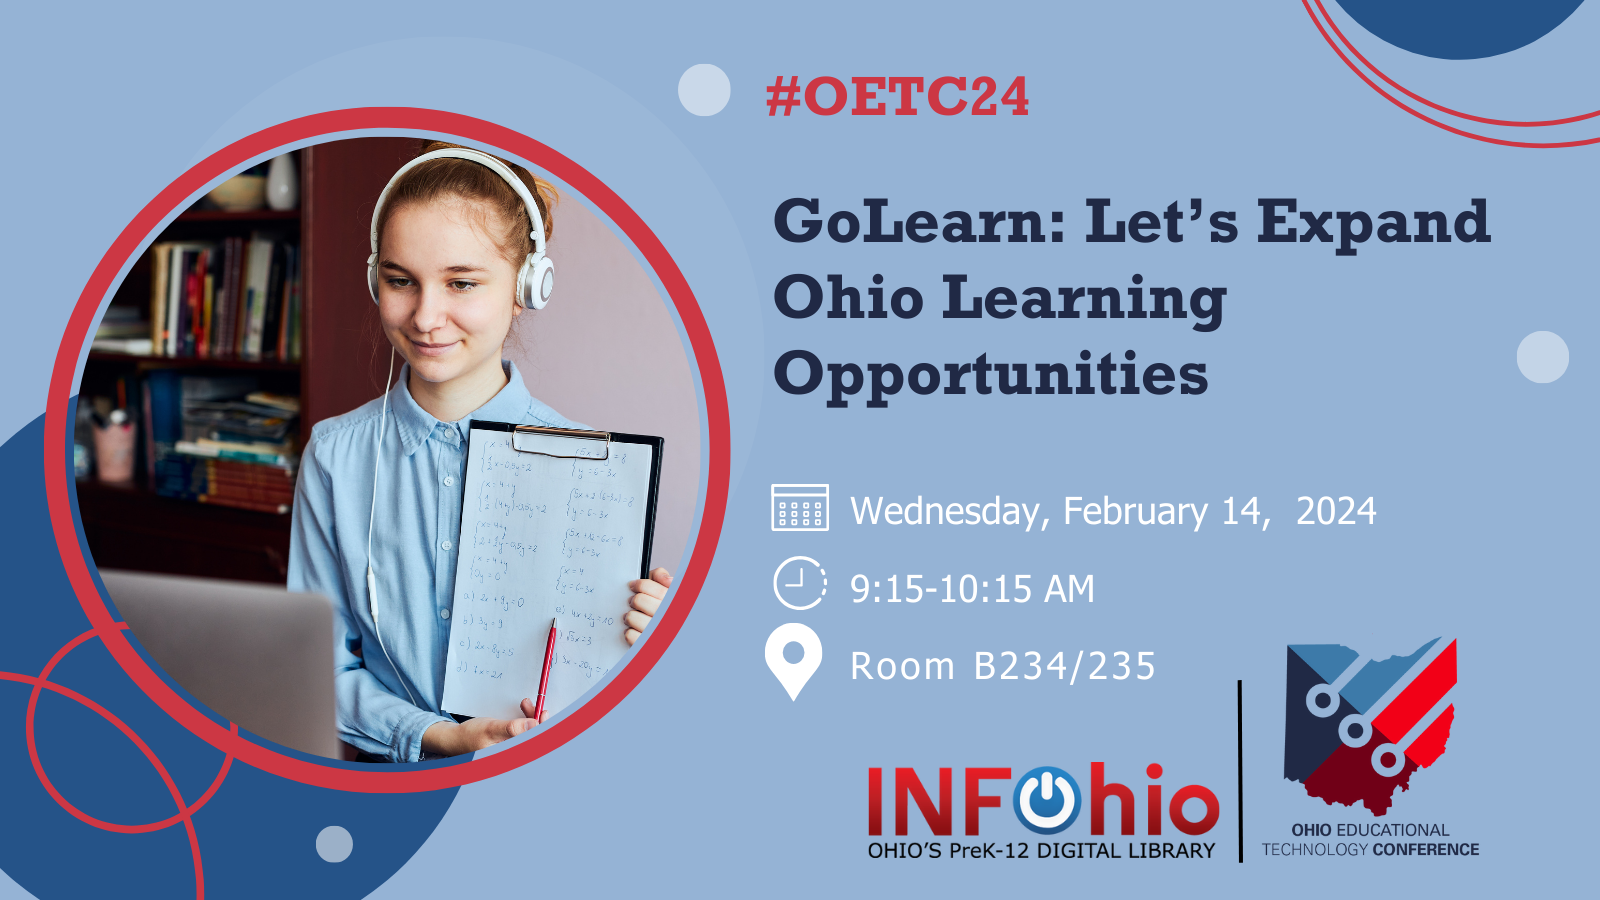 GoLearn: Let's Expand Ohio Learning Opportunities